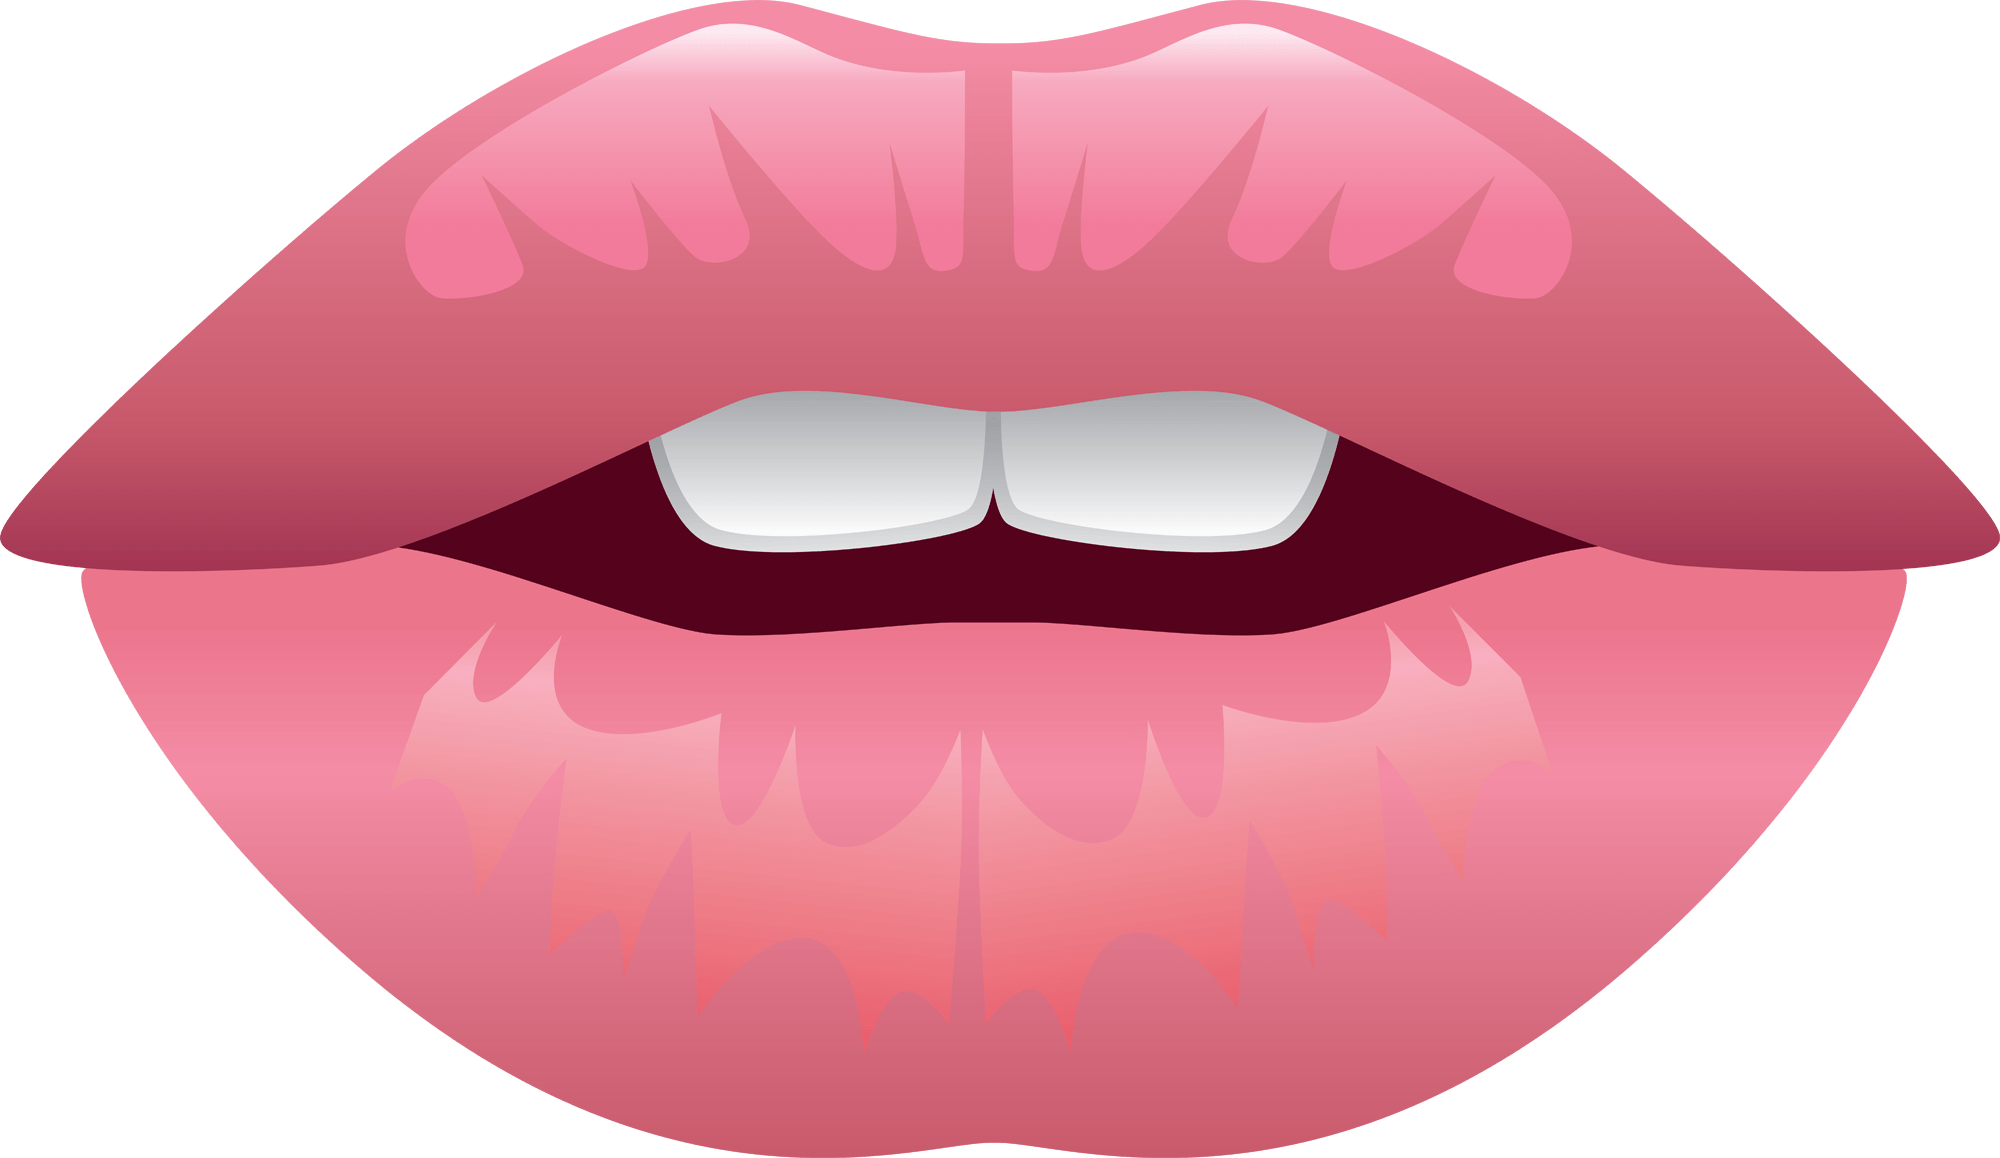 Tooth clipart lip. Lips realistic free collection